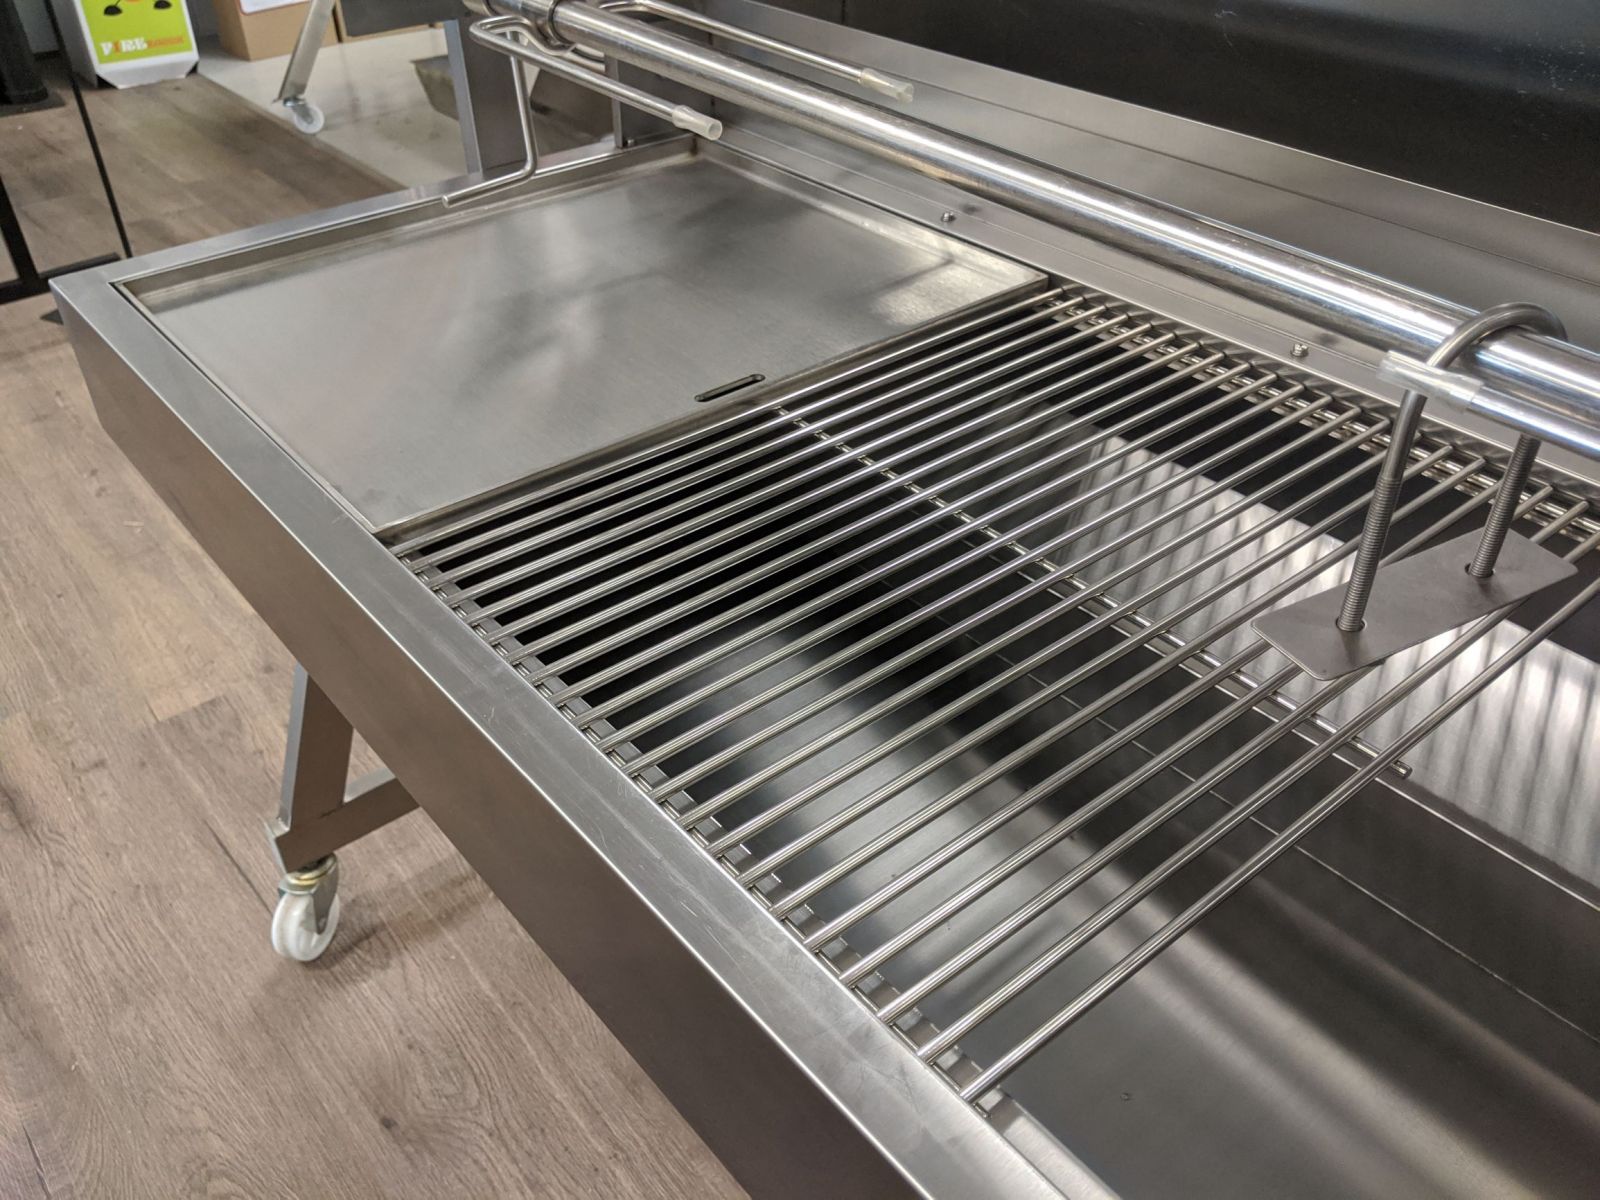 Image of the Stainless_Steel_BBQ_Grill inserted inserted into a spit roaster